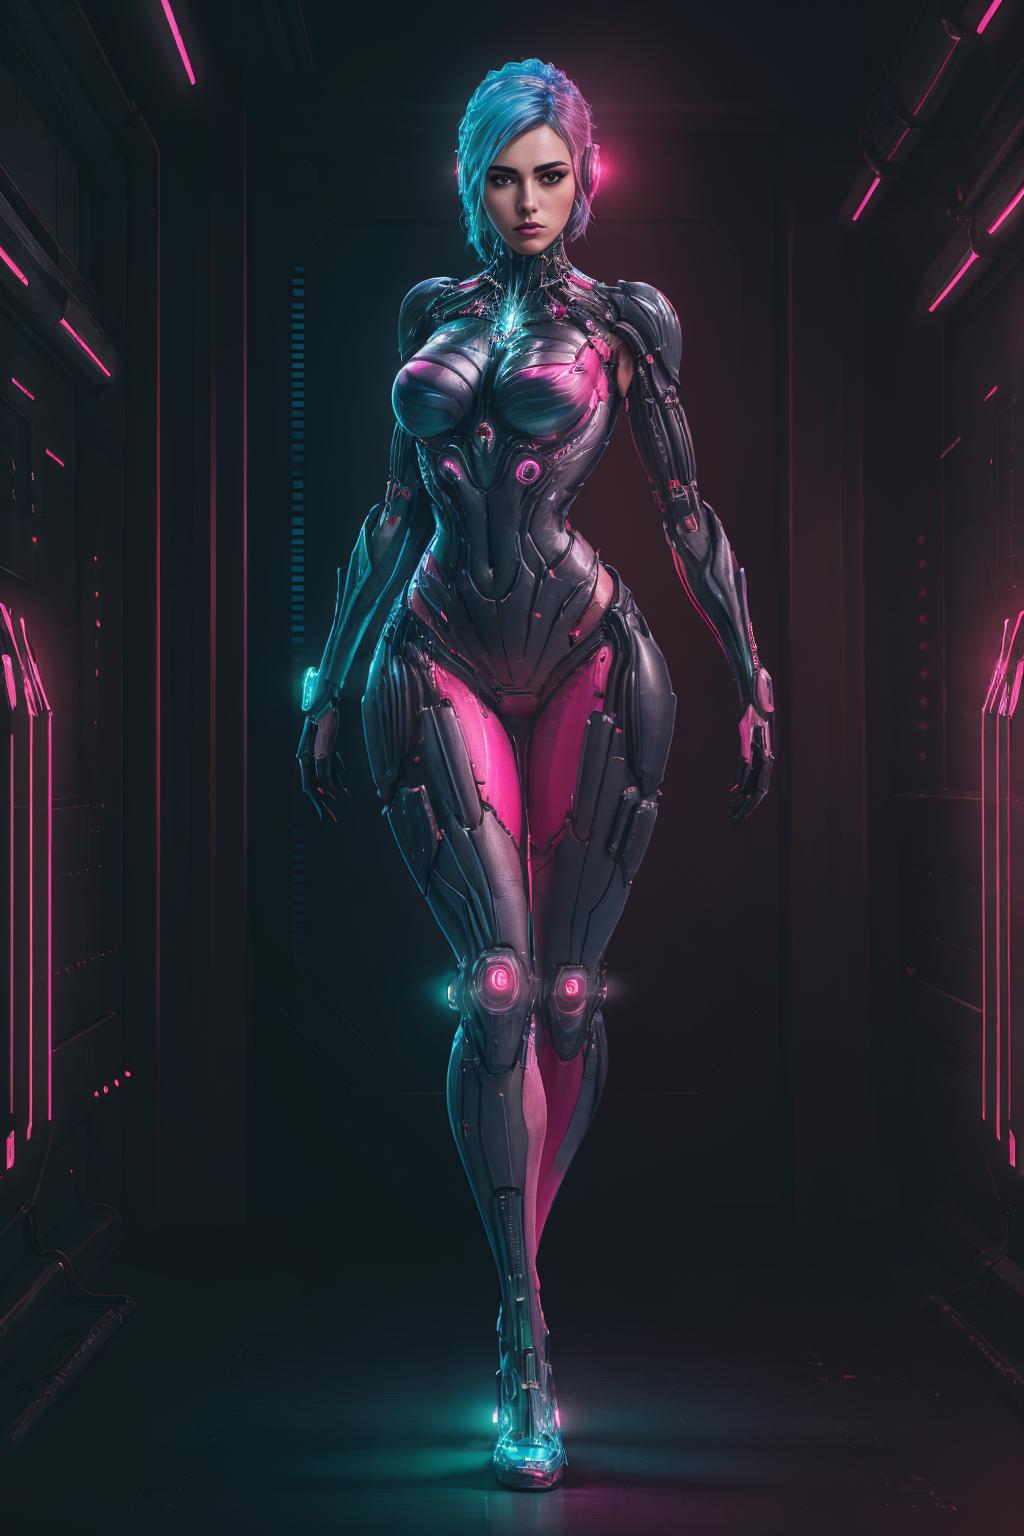 Robotic woman with pink and silver clothing posing in a futuristic setting.